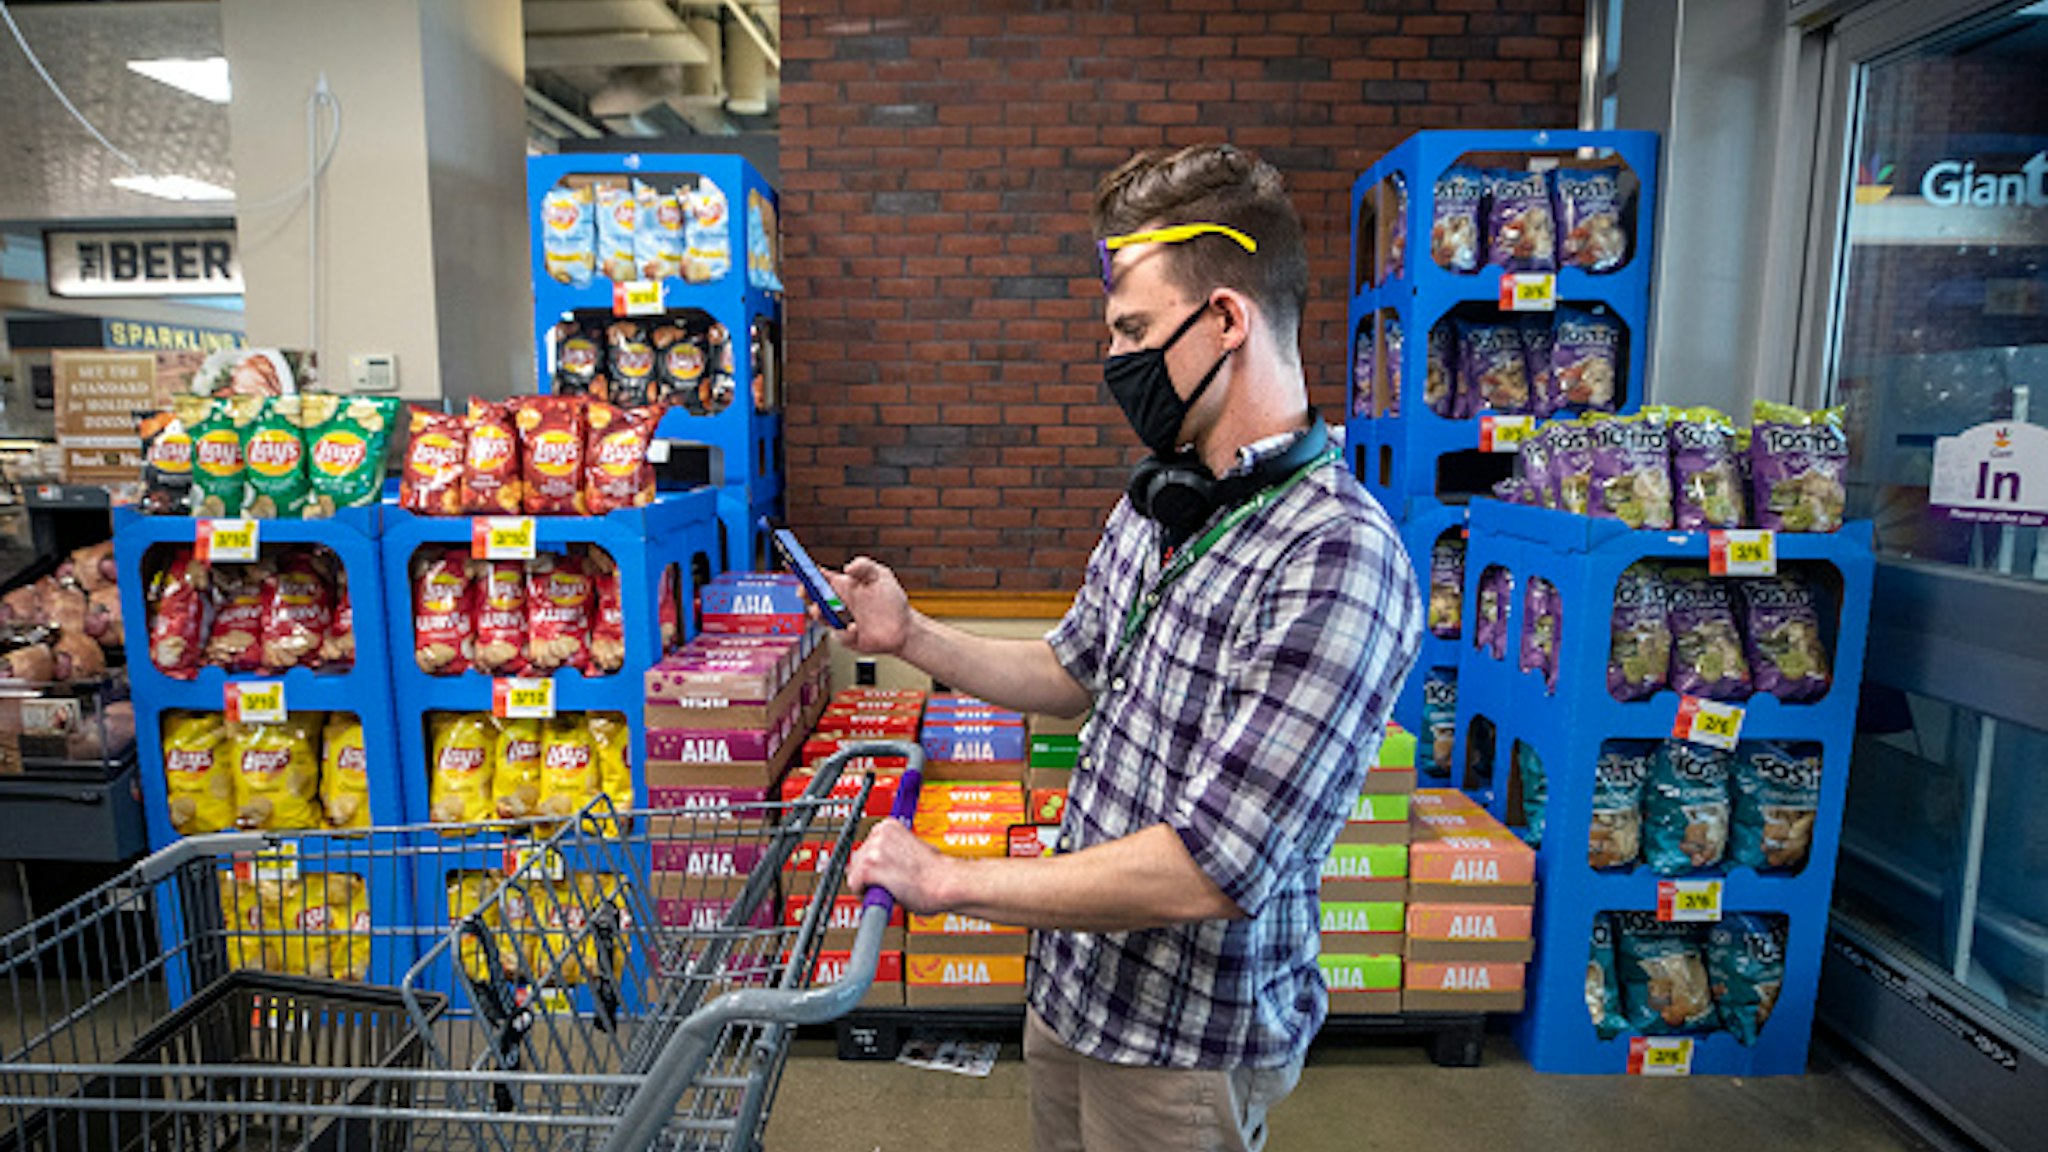 WASHINGTON,DC-APR6: Matt Gillette, a 36 year-old Instacart shopper, prepares to fulfill an order at a Giant supermarket in Washington, DC, April 6, 2020. For the past two years he's been part of the gig economy, driving for Lyft, doing handiwork on TaskRabbit. The work was so unstable he's been on the verge of homelessness, crashing with some friends and asking others to take in his beloved dog, a lab mix named Nitro. For years there has been talk of a divided America, of an economy that's highly beneficial to some and detrimental to others. The wrath of a highly contagious, sometimes lethal virus has shown us where, precisely, it stands: at the front door. On one side are people who have the luxury of staying safely at home, working -- or not -- and ordering whatever they want to be delivered. On the other side are those doing the delivering.